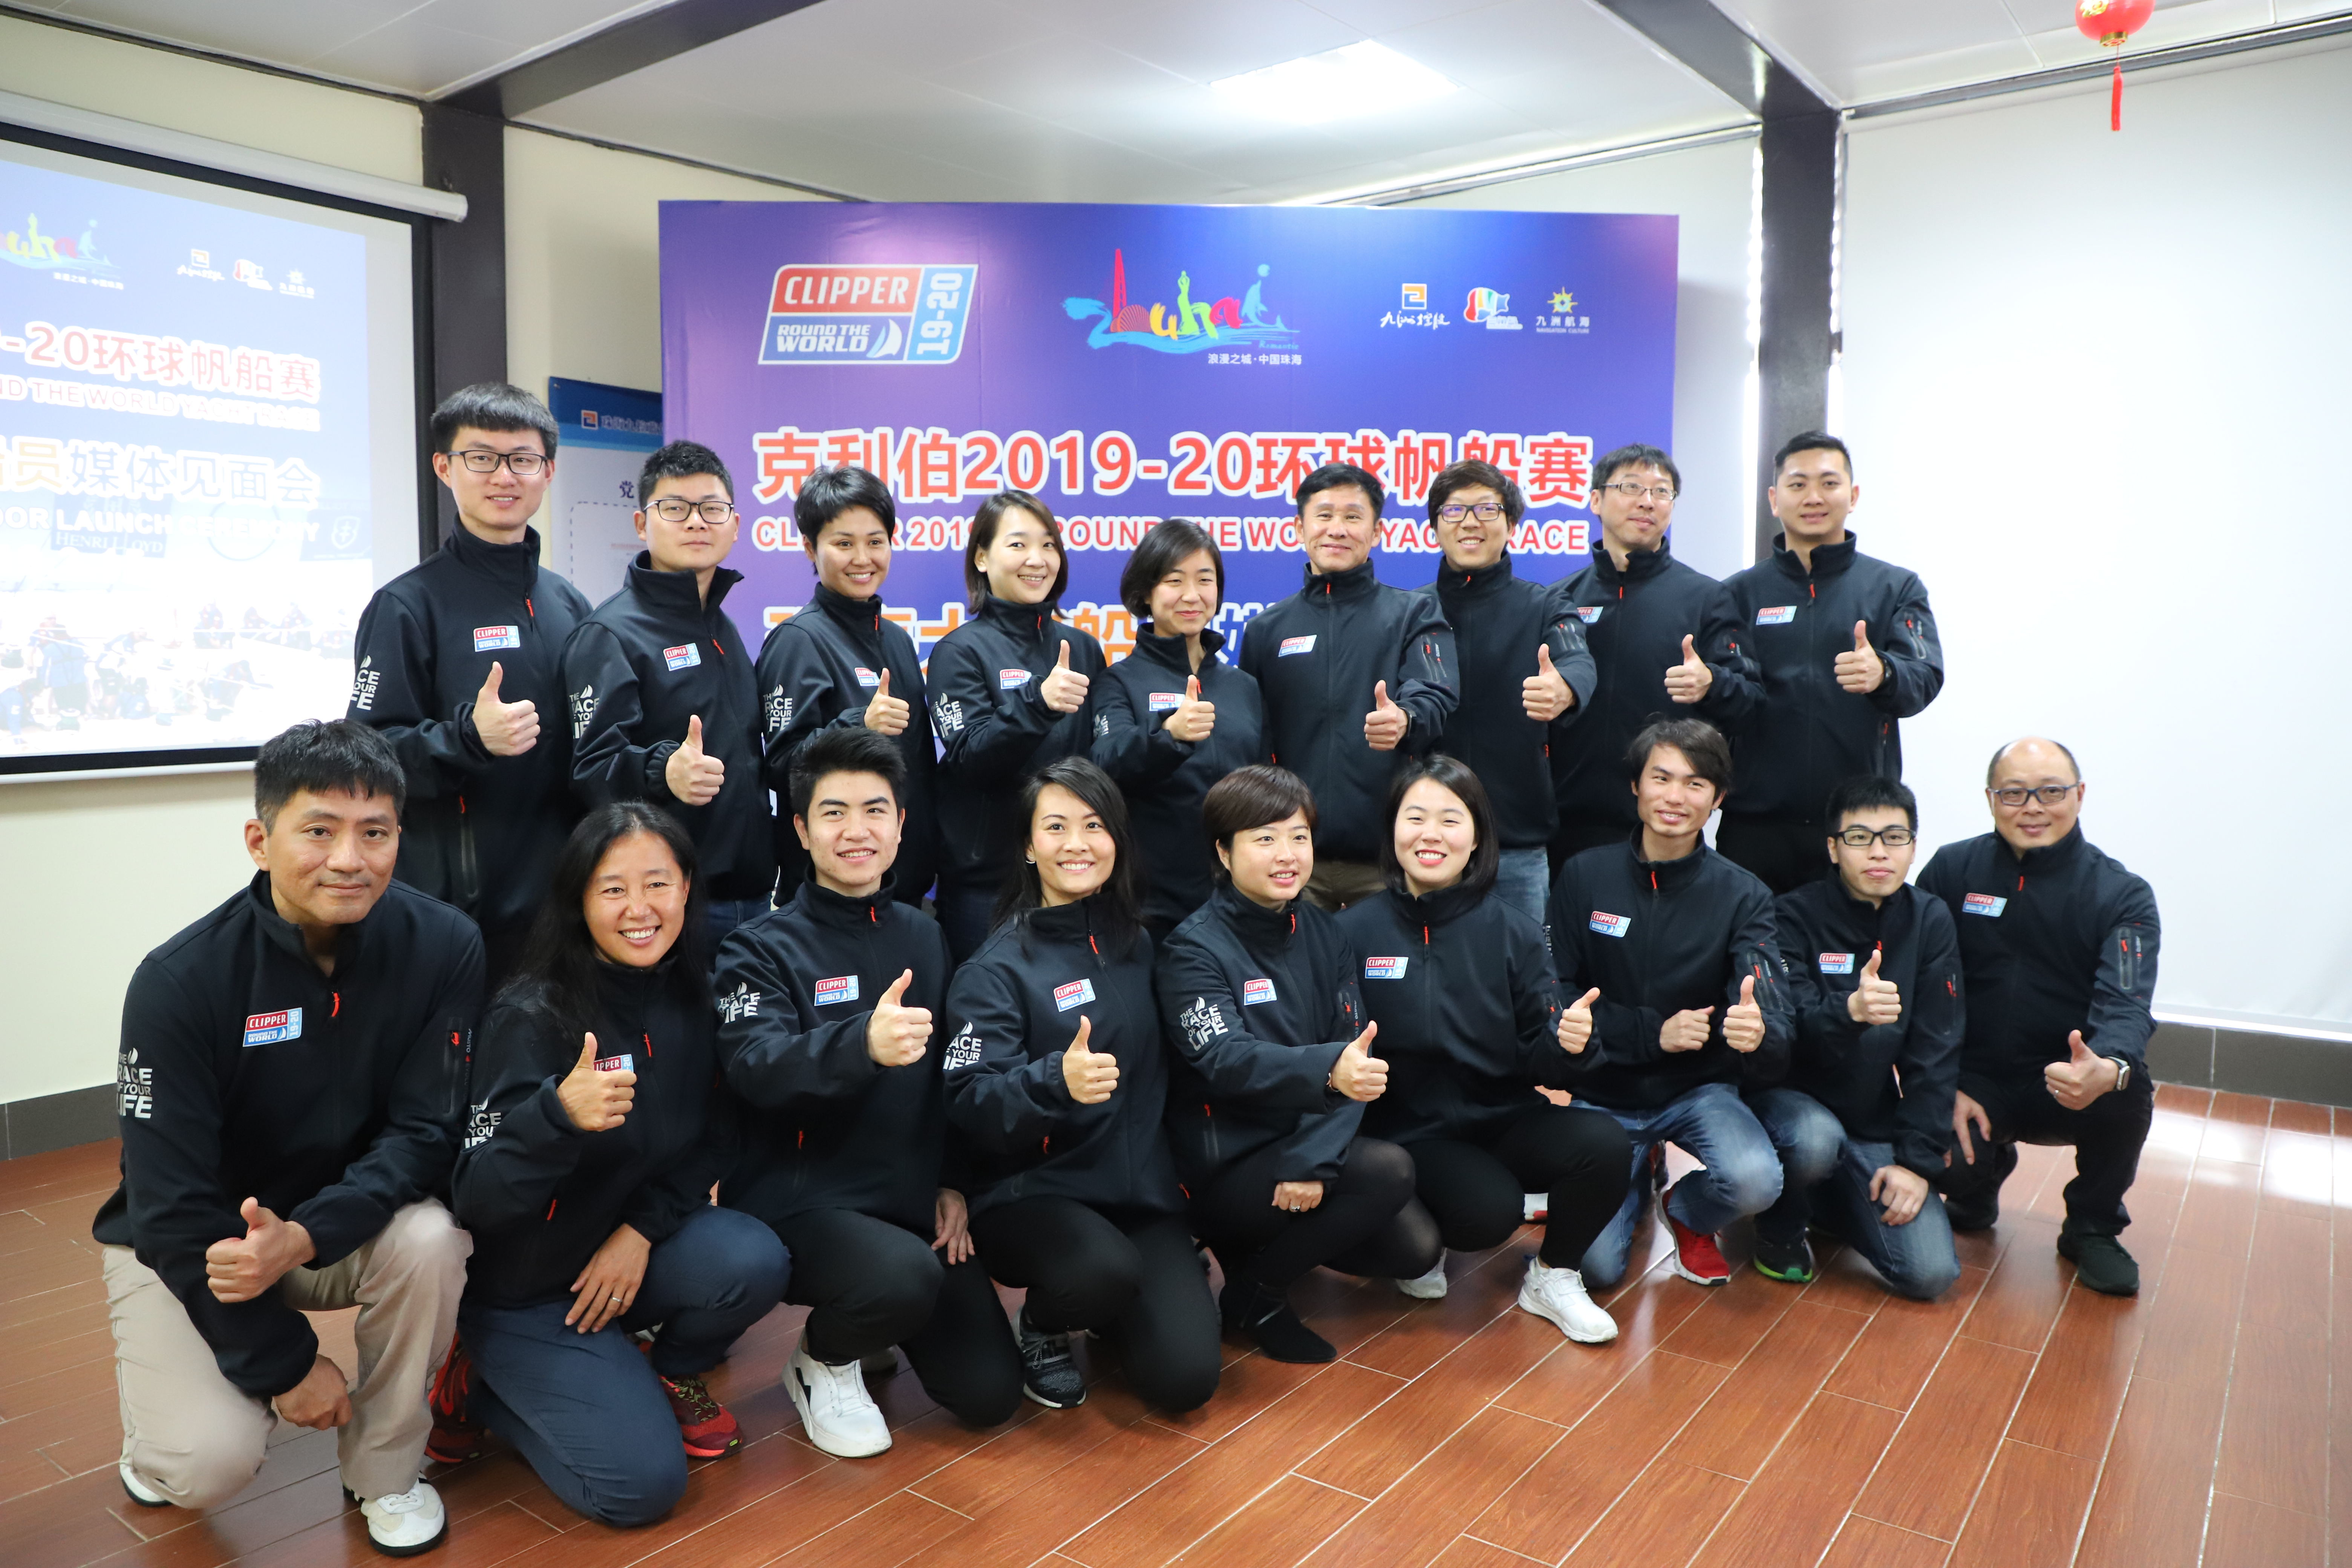 Meet the Ambassadors selected to represent Zhuhai in the Clipper 2019-20 Race